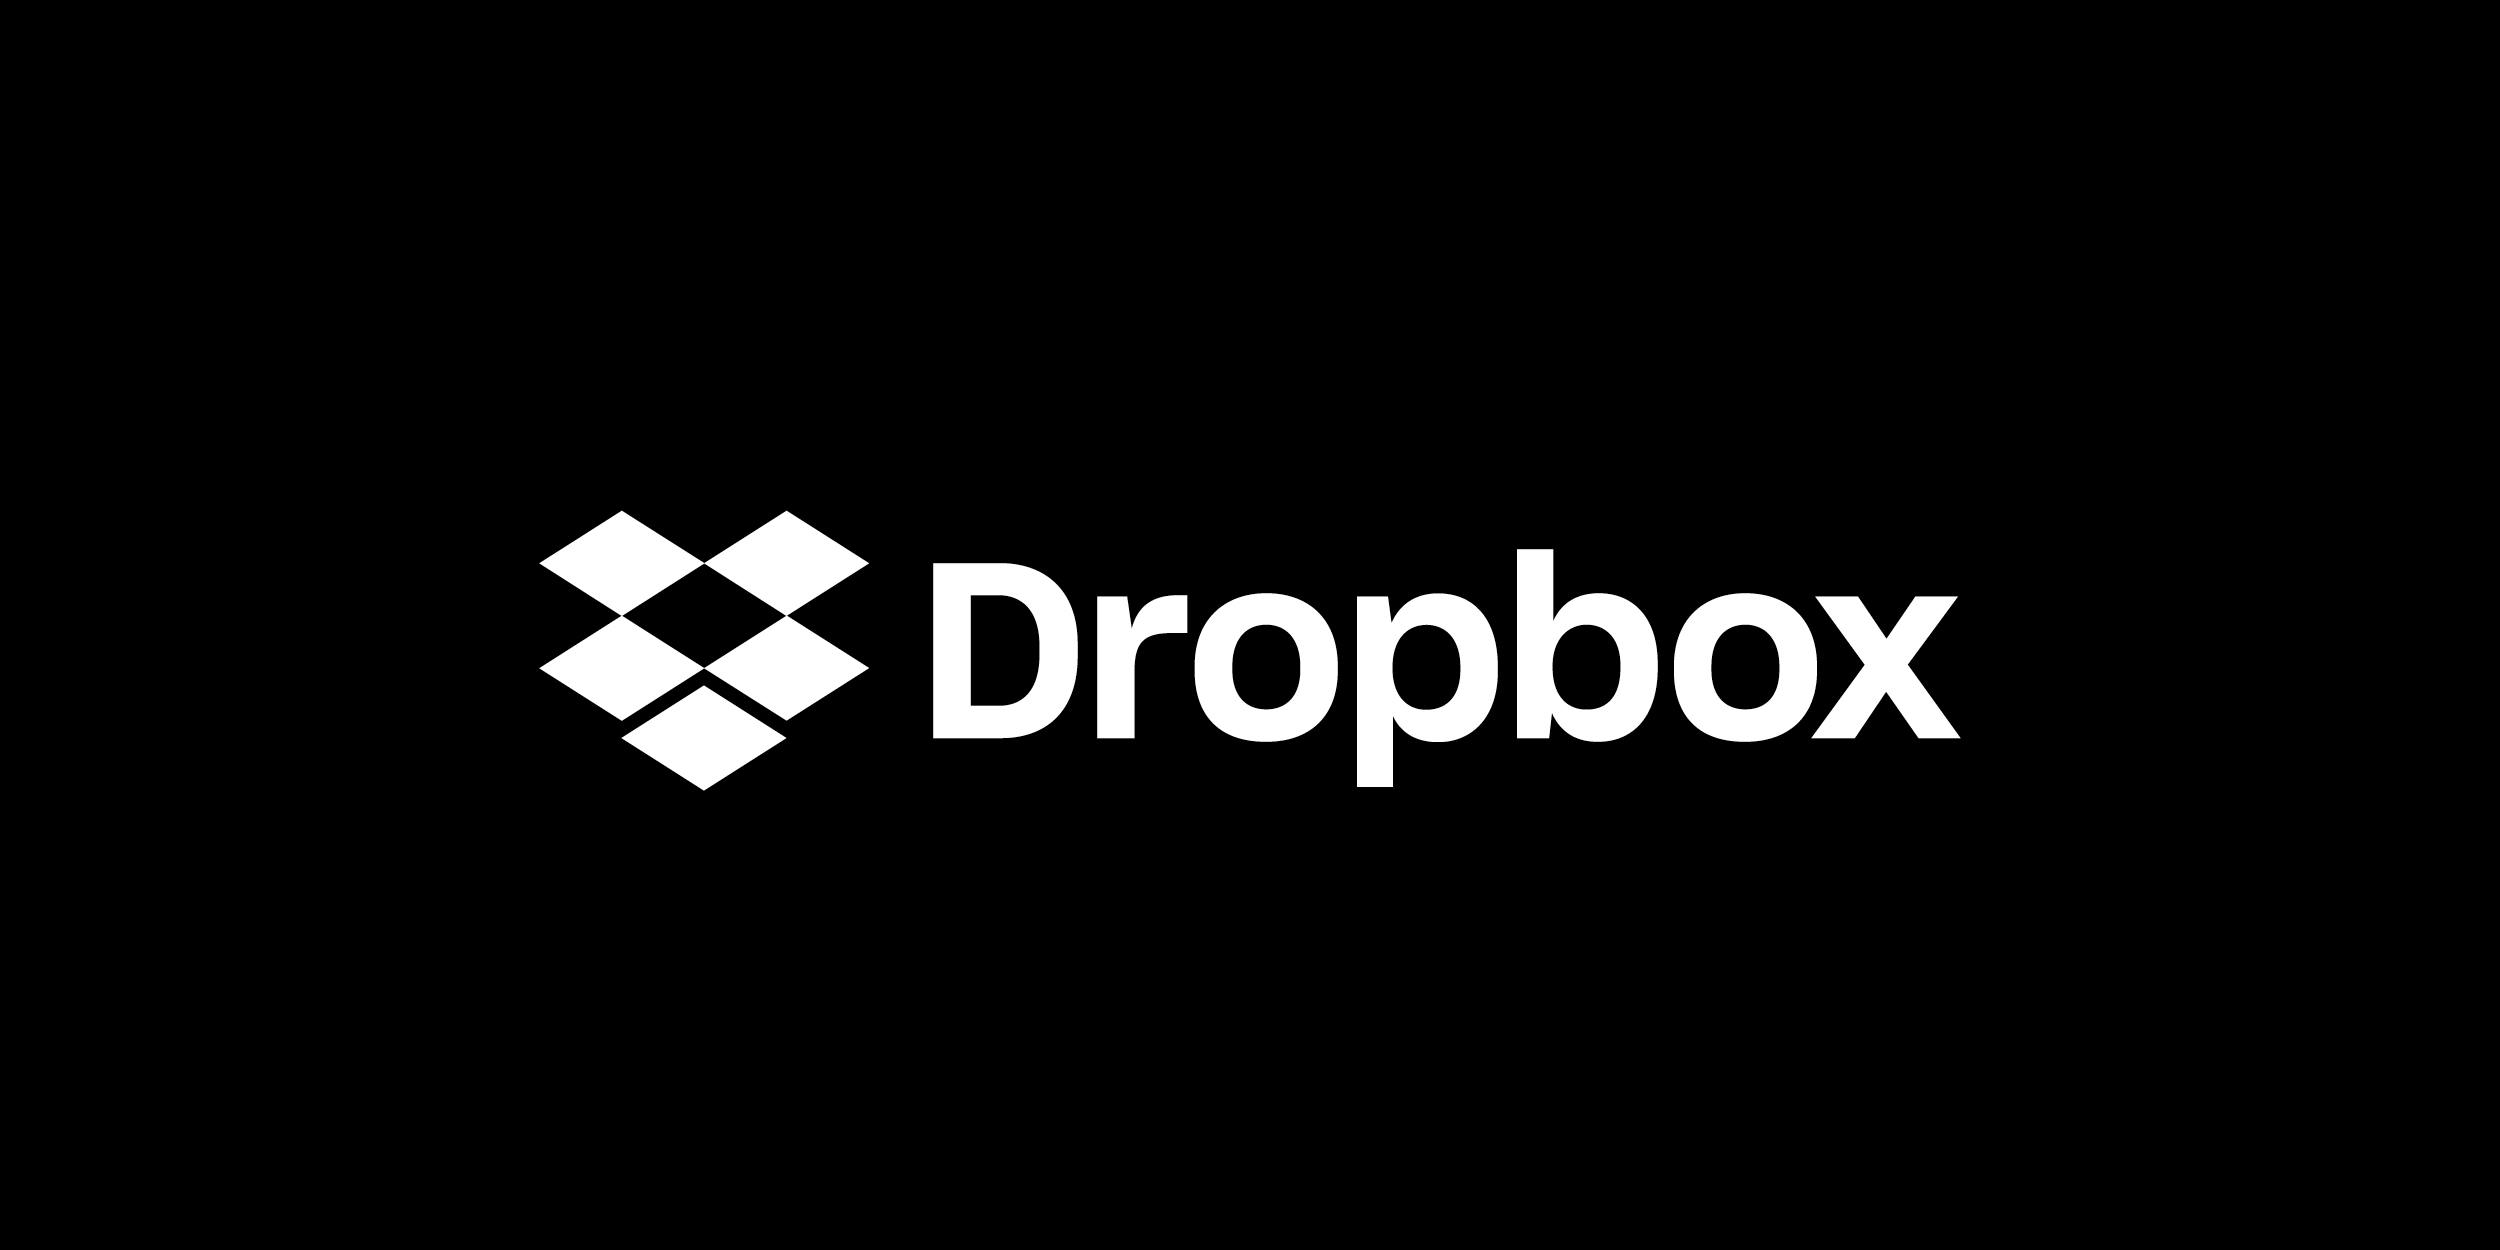 In use for Dropbox